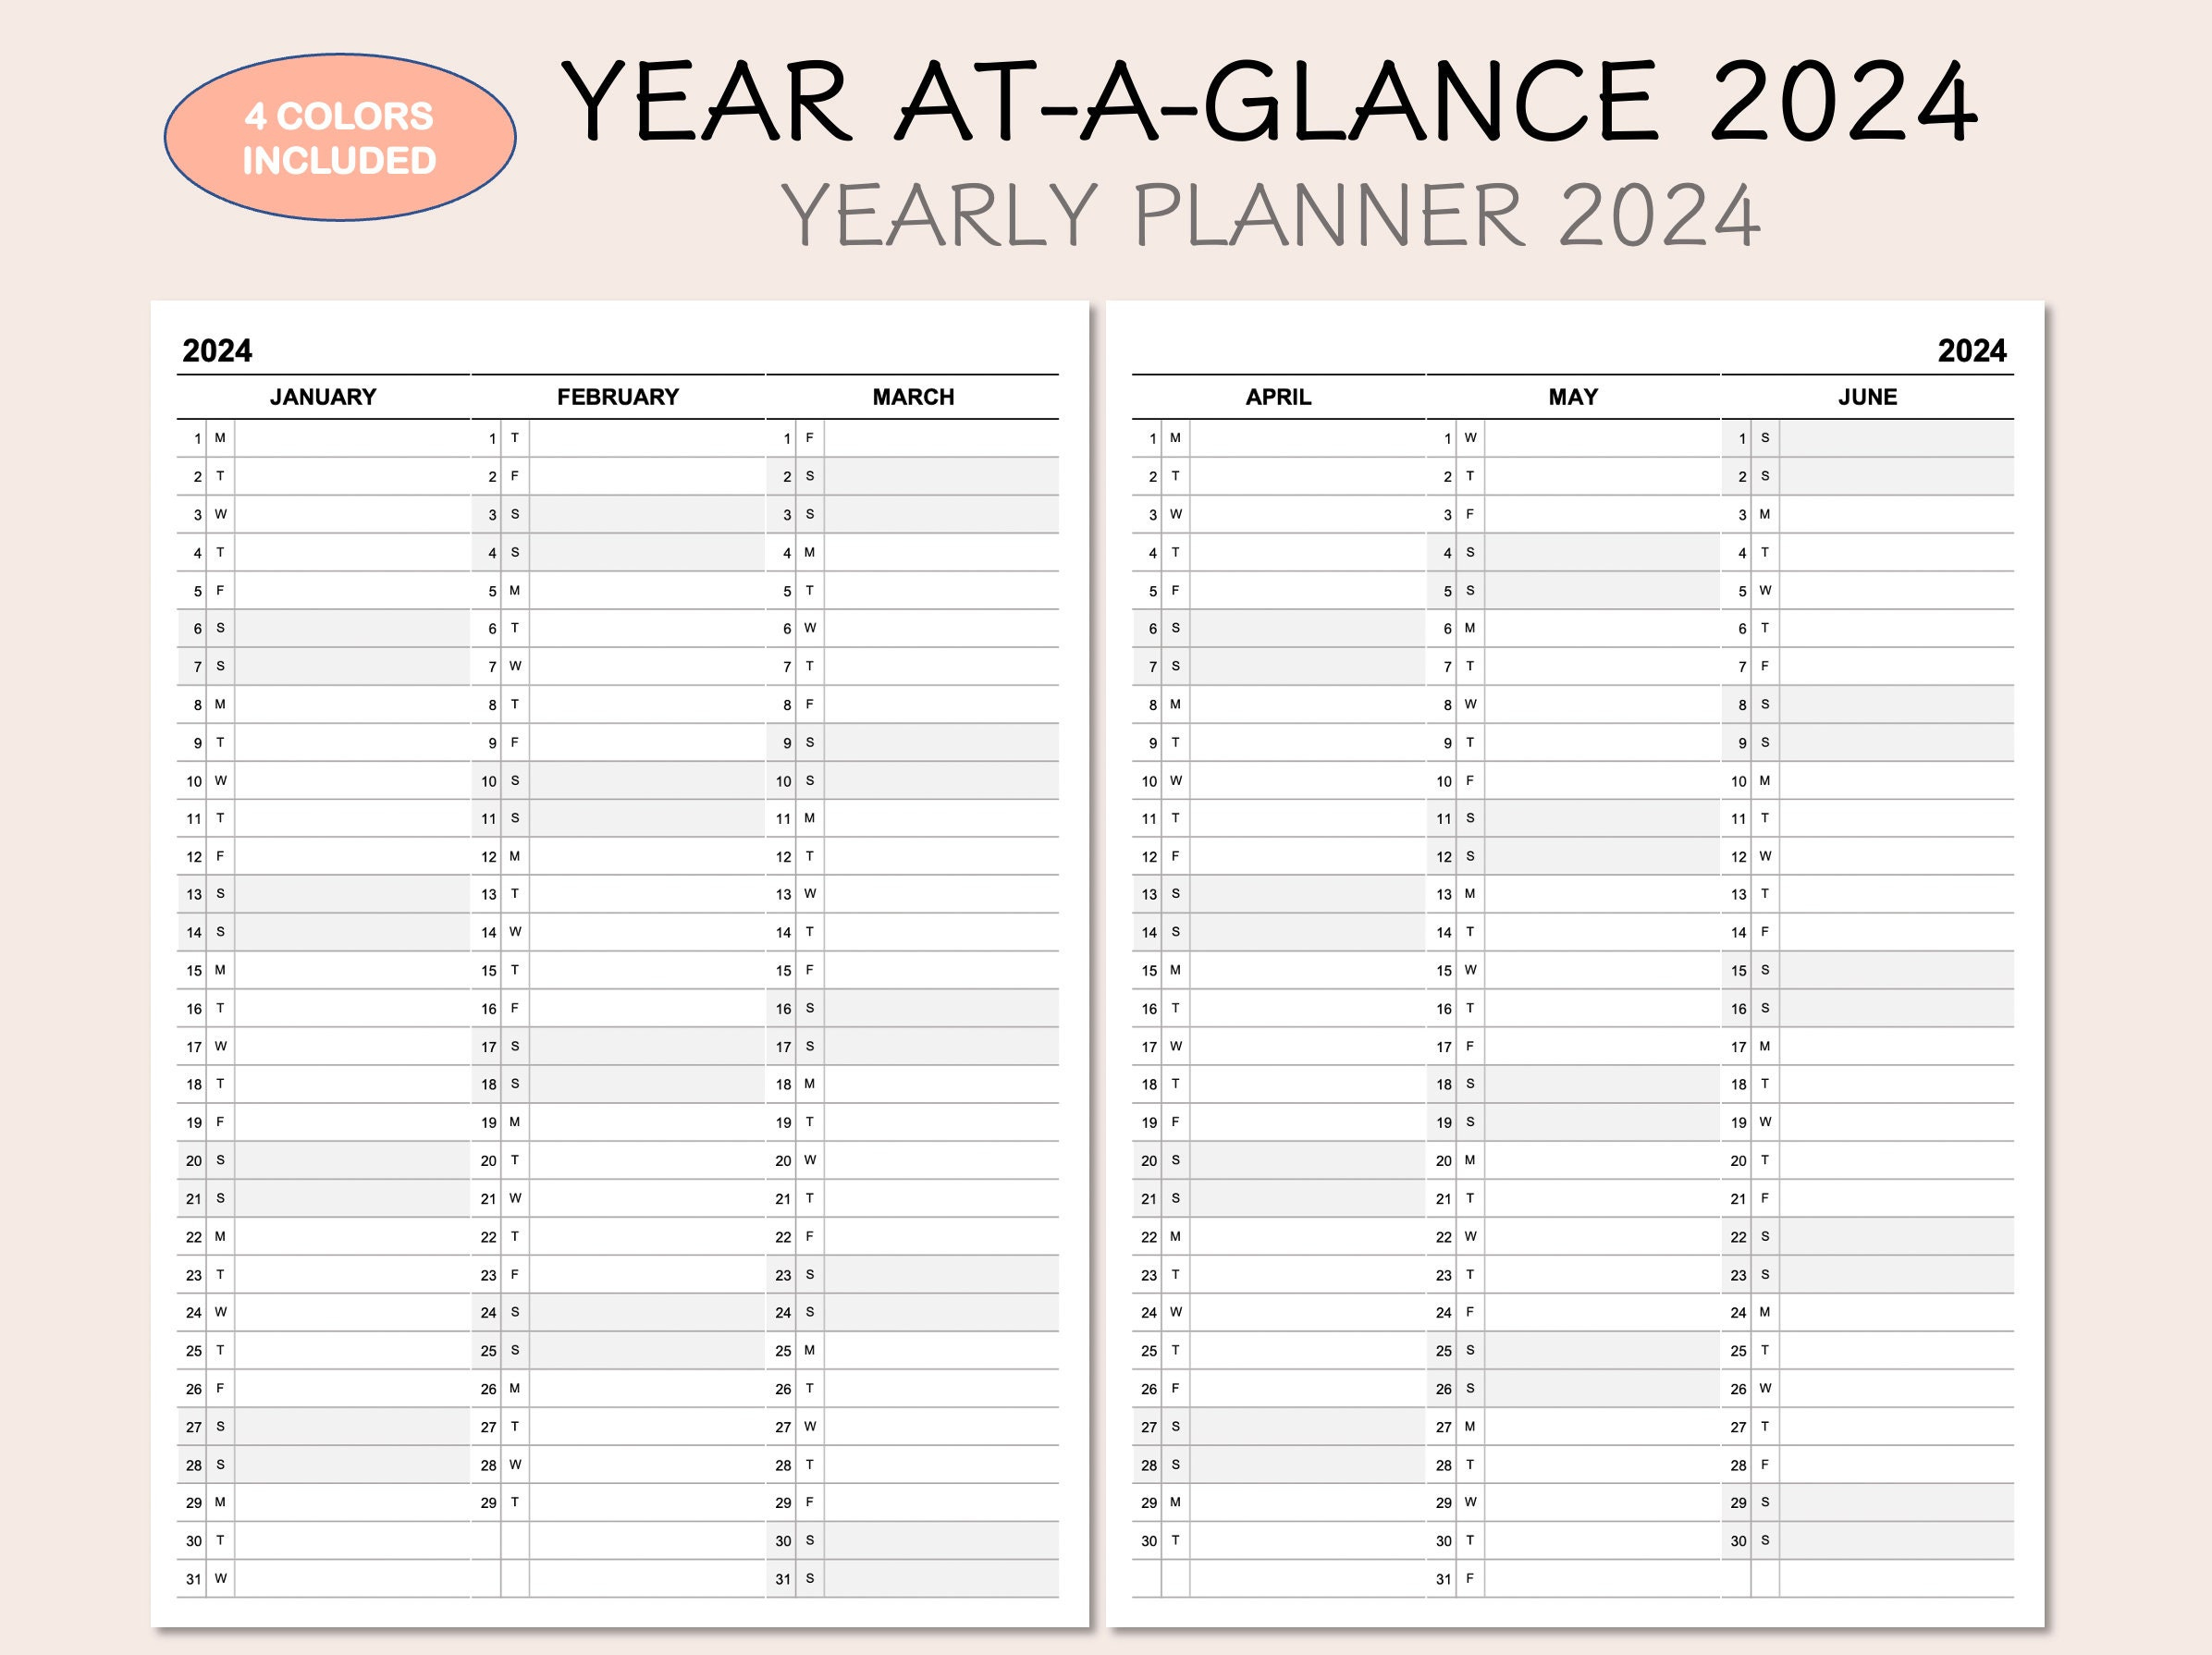 Printable Yearly Planner Calendar 2024 Yearly Overview 2024 - Etsy | 2024 Yearly Calendar And Planner